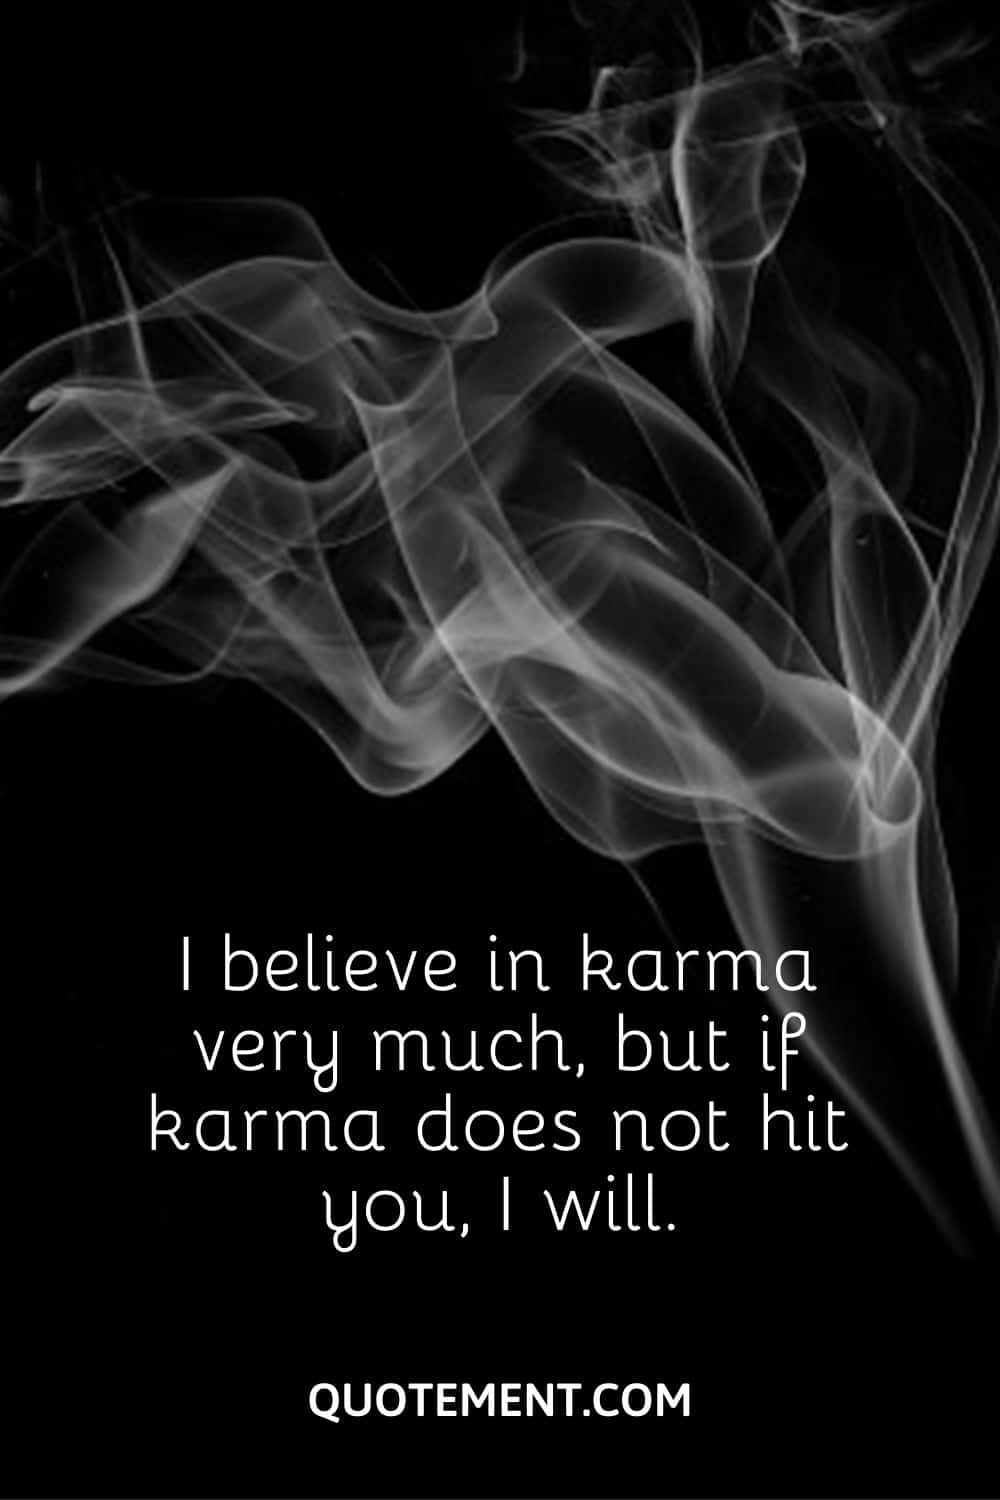 I believe in karma very much, but if karma does not hit you, I will.